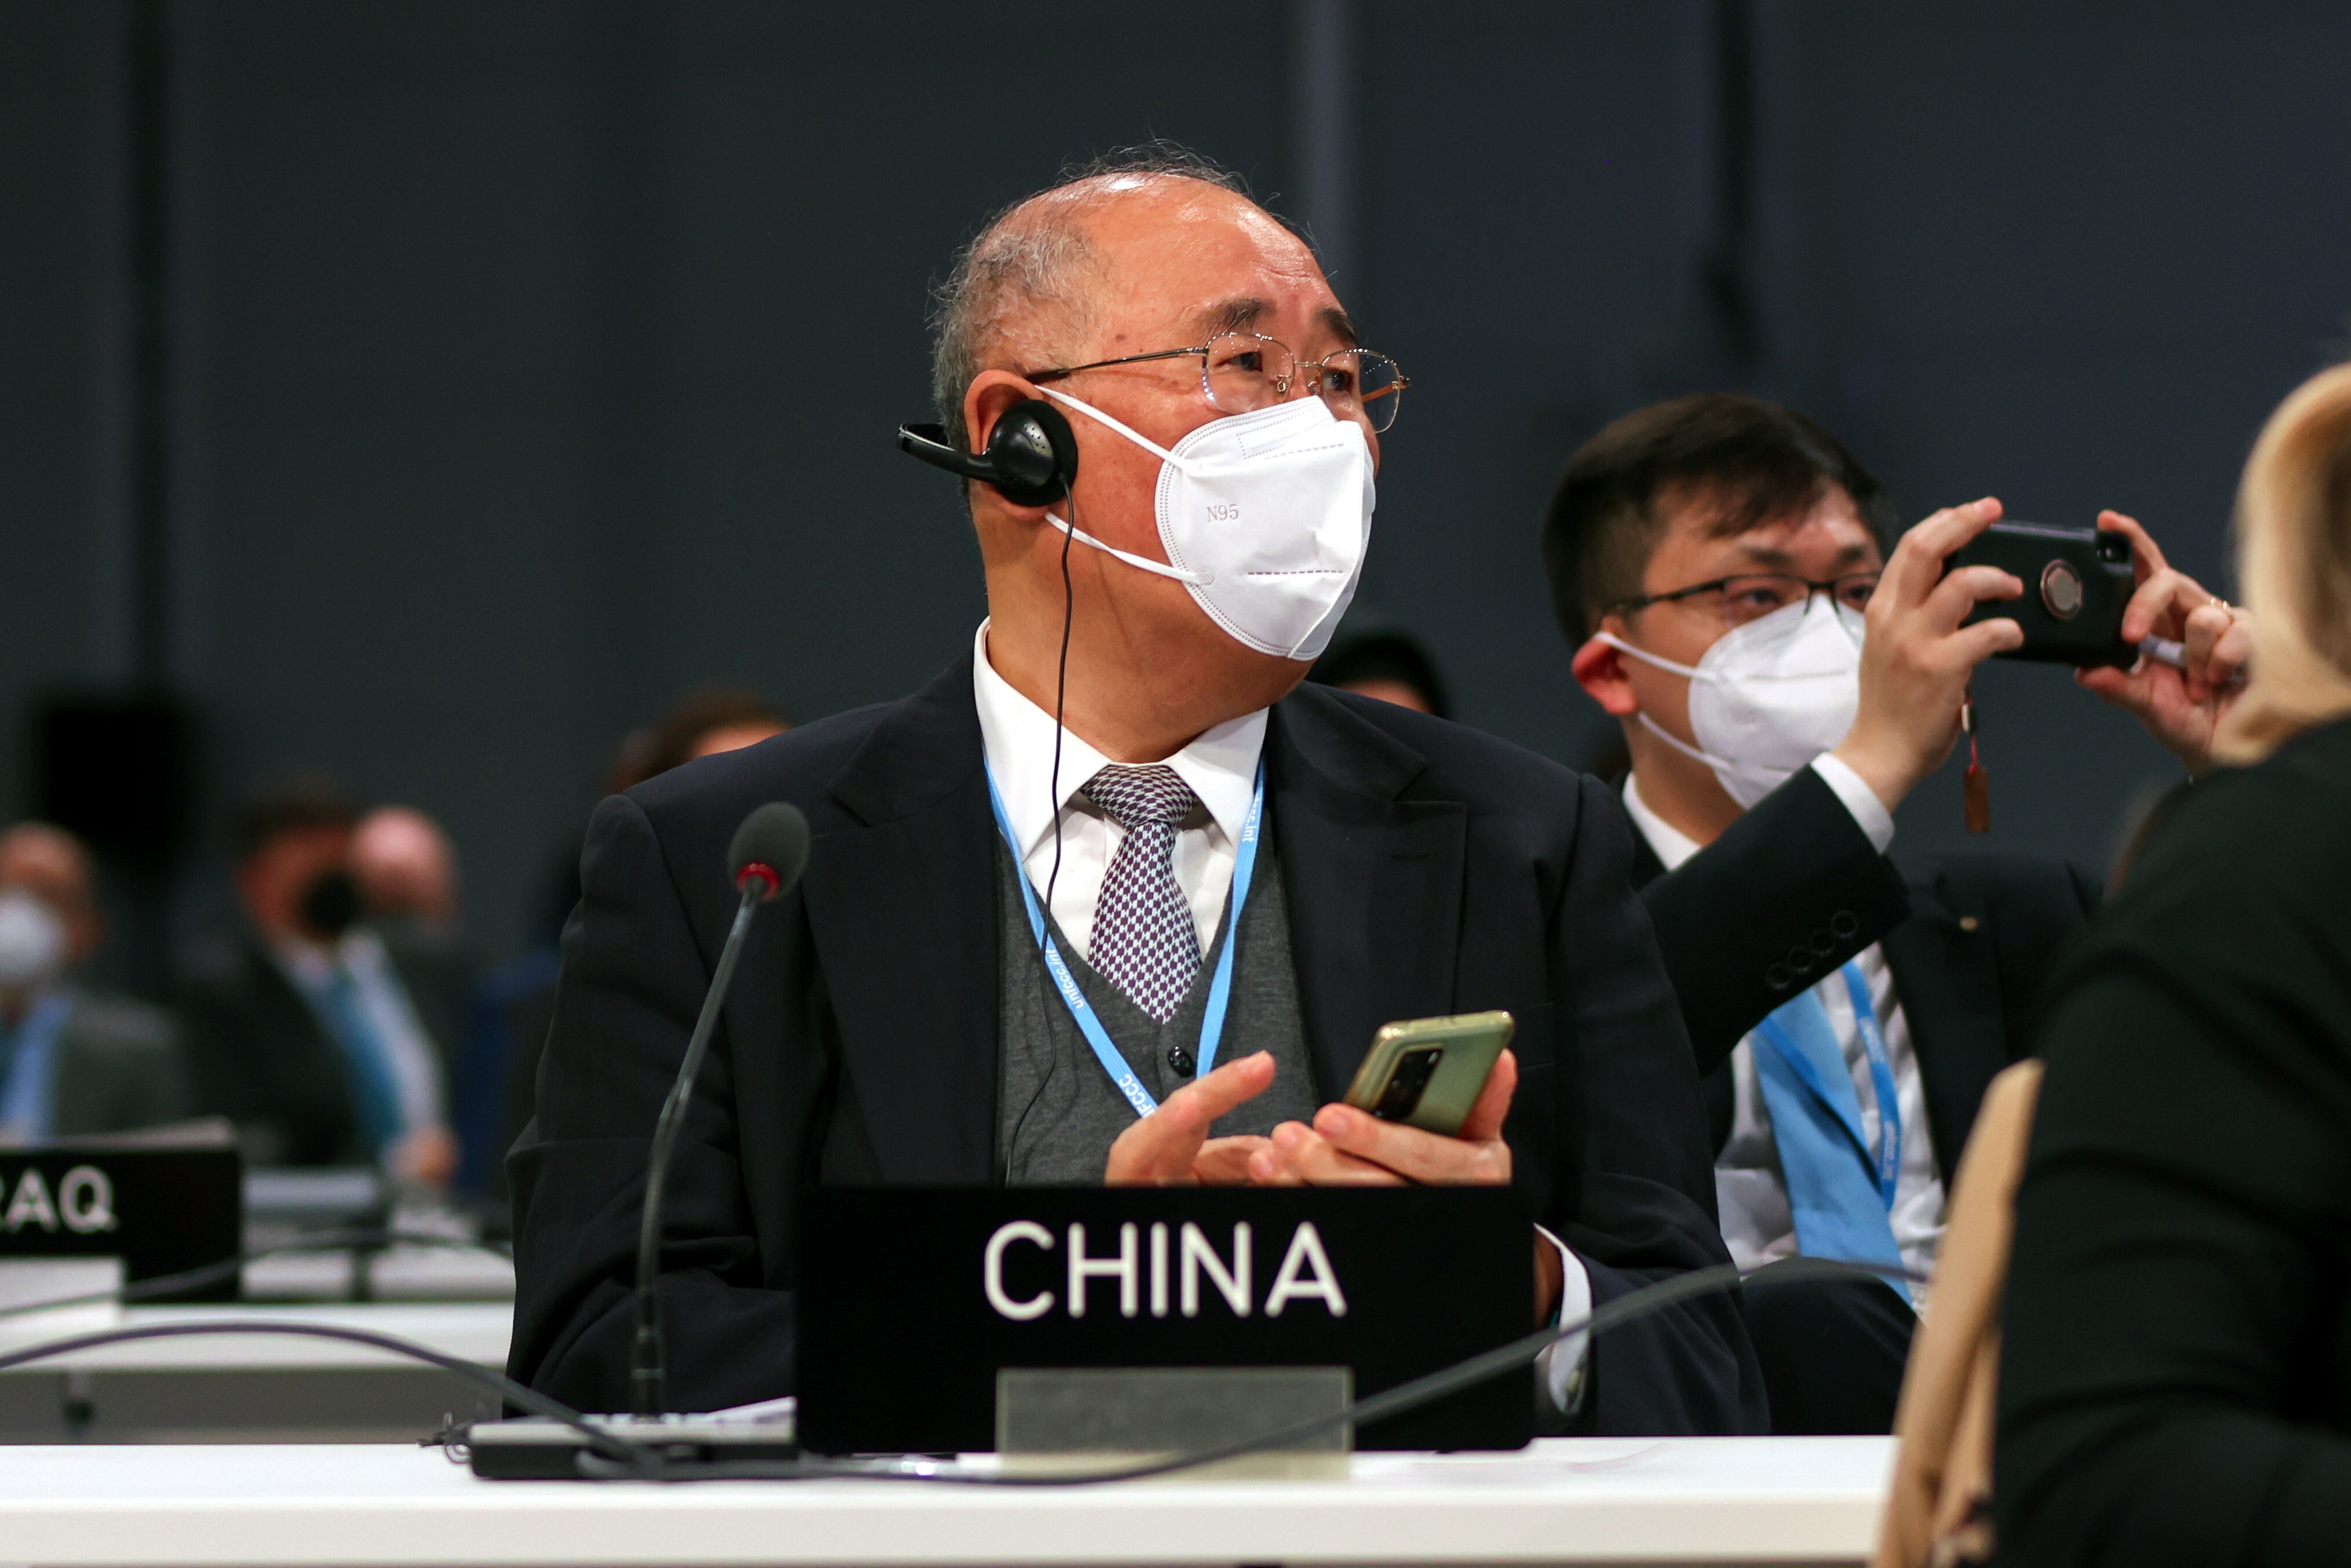 Xie Zhenhua, China’s special envoy for climate change attends the opening ceremony of the UN Climate Change Conference (COP26) in Glasgow. The COP26 conference runs until November 12. Photo: EPA-EFE